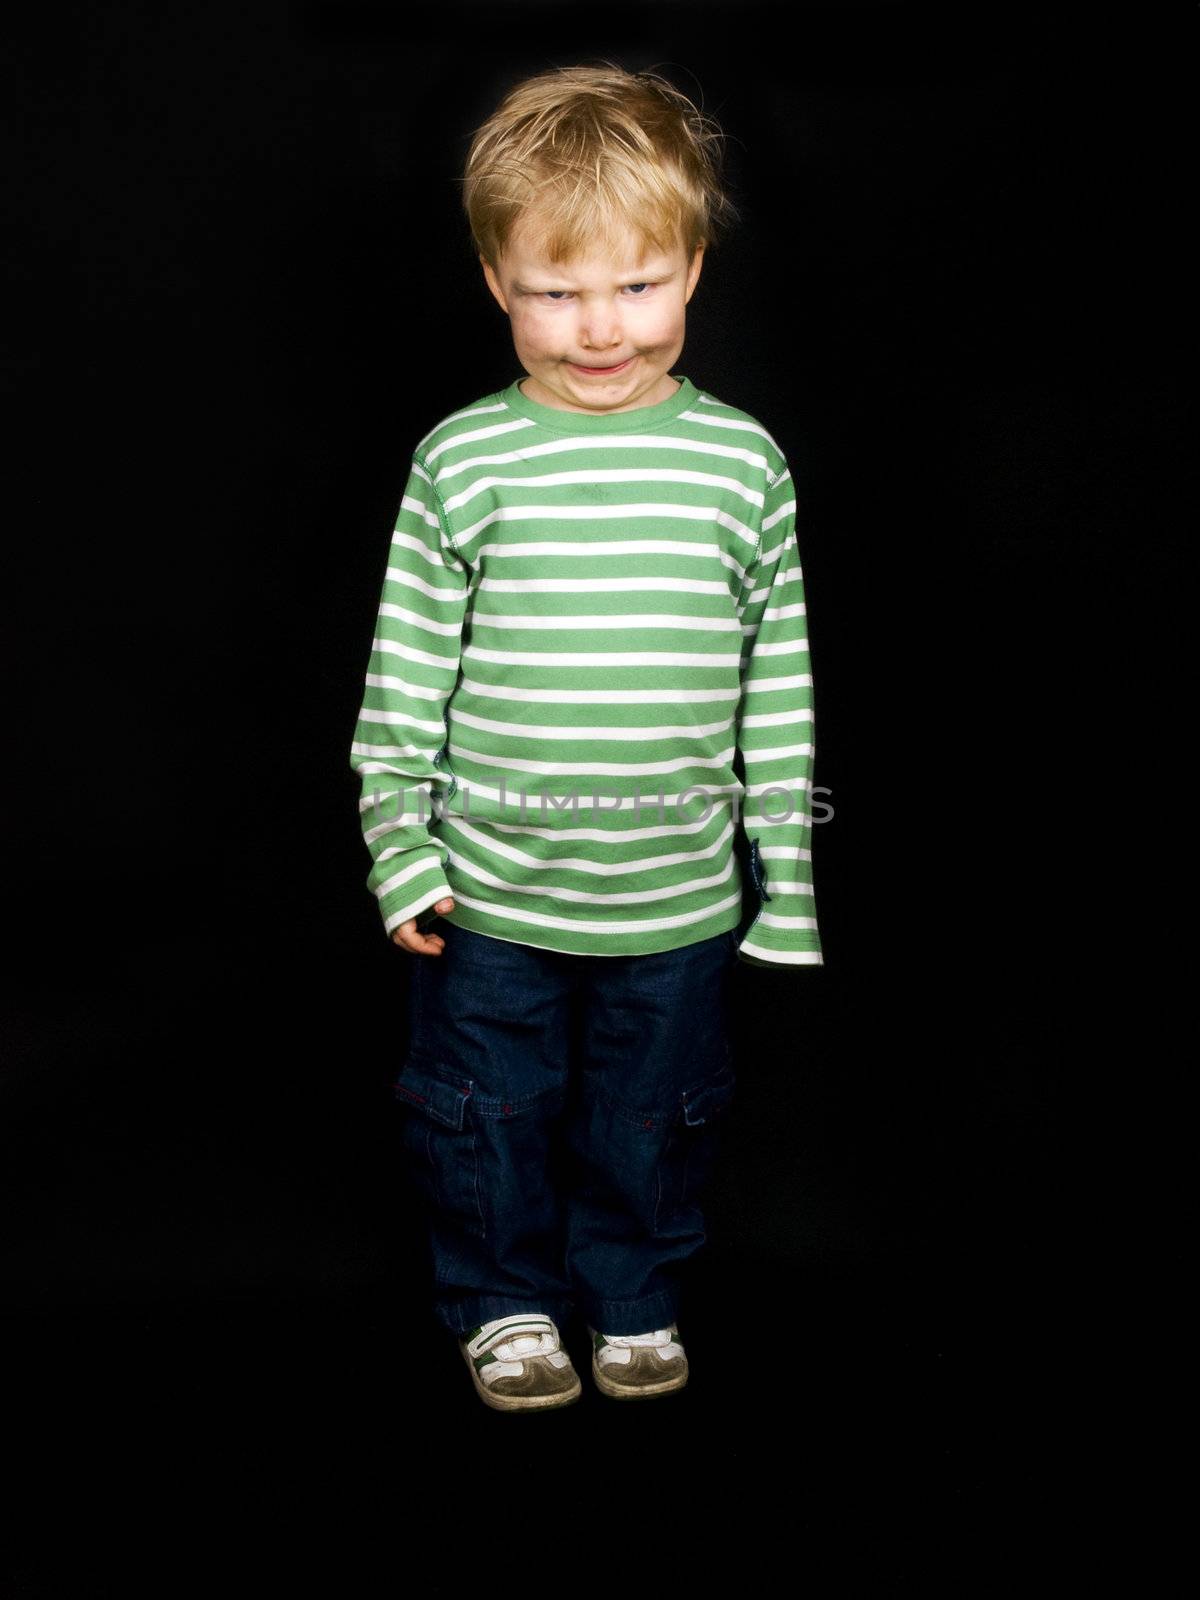 Little boy making scare face on black background. Boy have blue eyes and blond hair and have a bit of dirt on his face